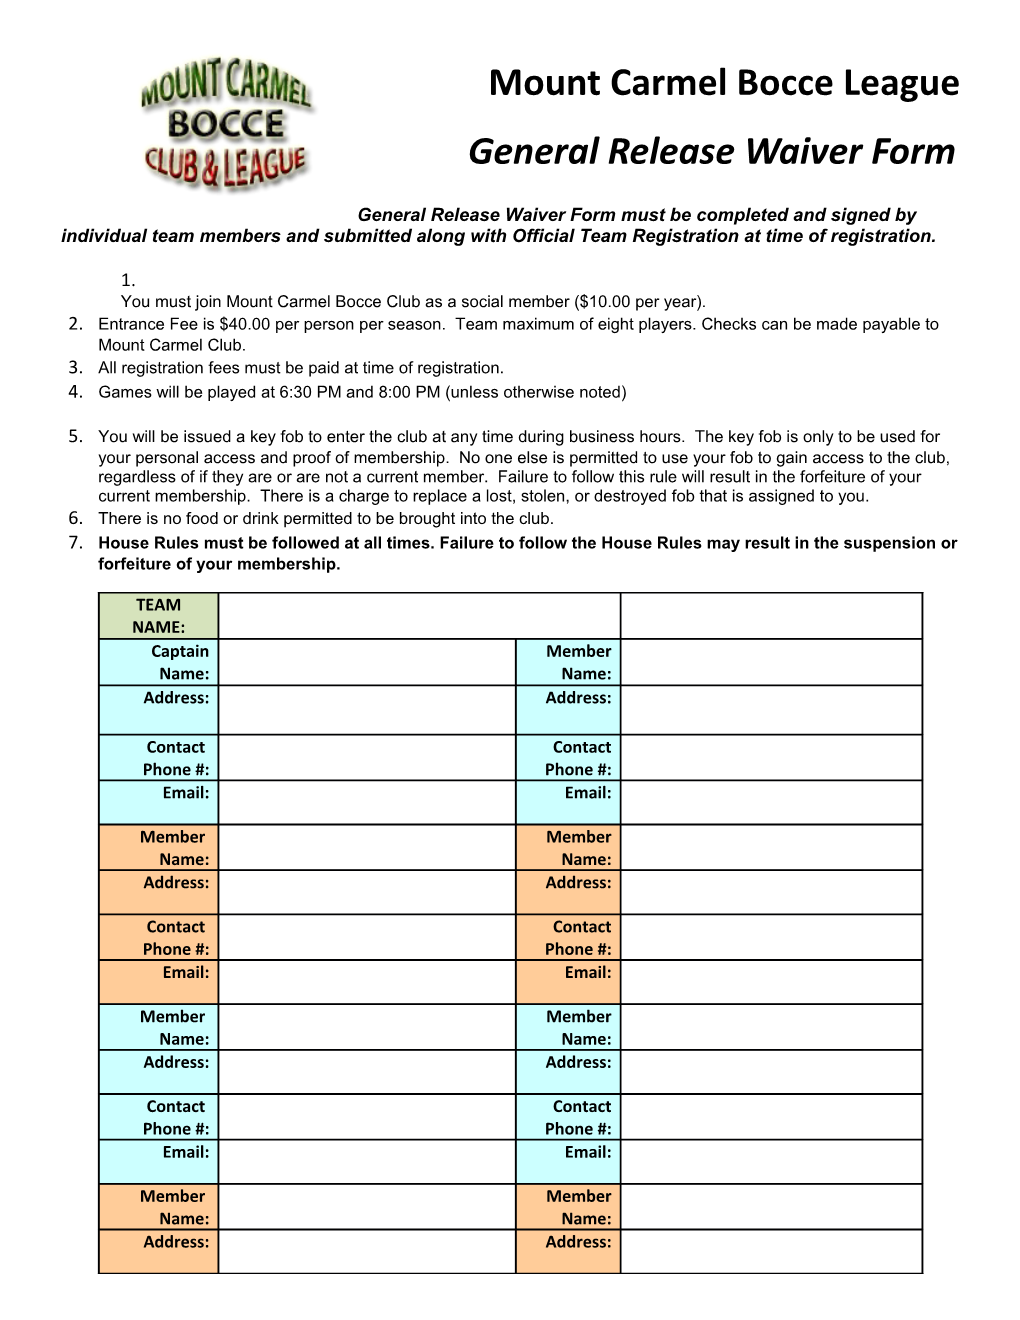 General Release Waiver Form